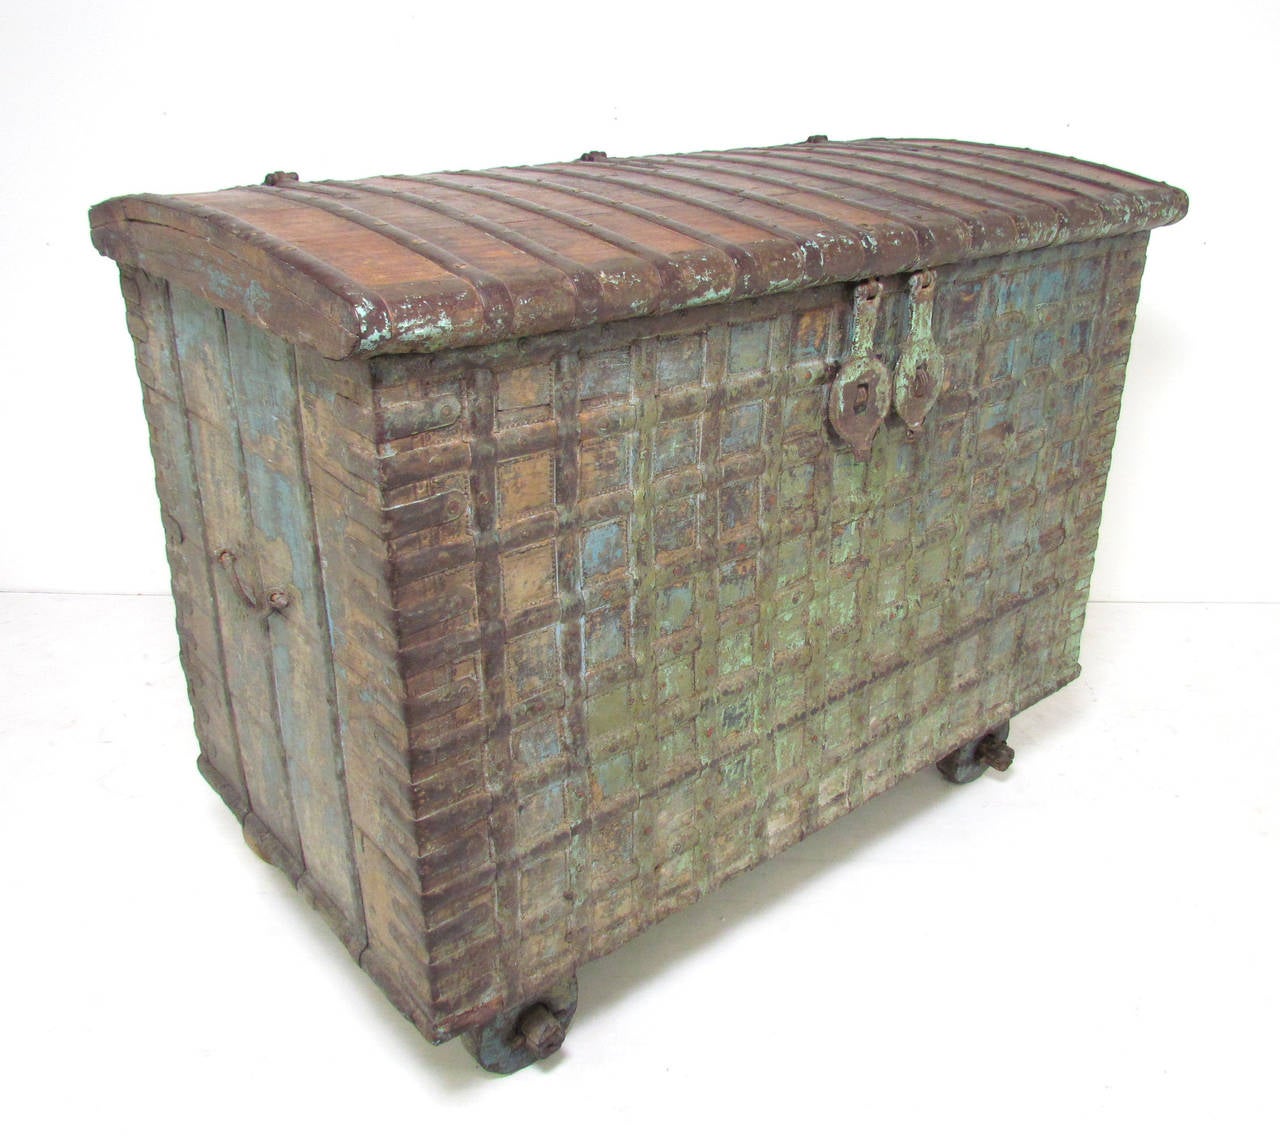 Antique 19th century Damchiya dowry chest, from Rajasthan, India. At 52.25